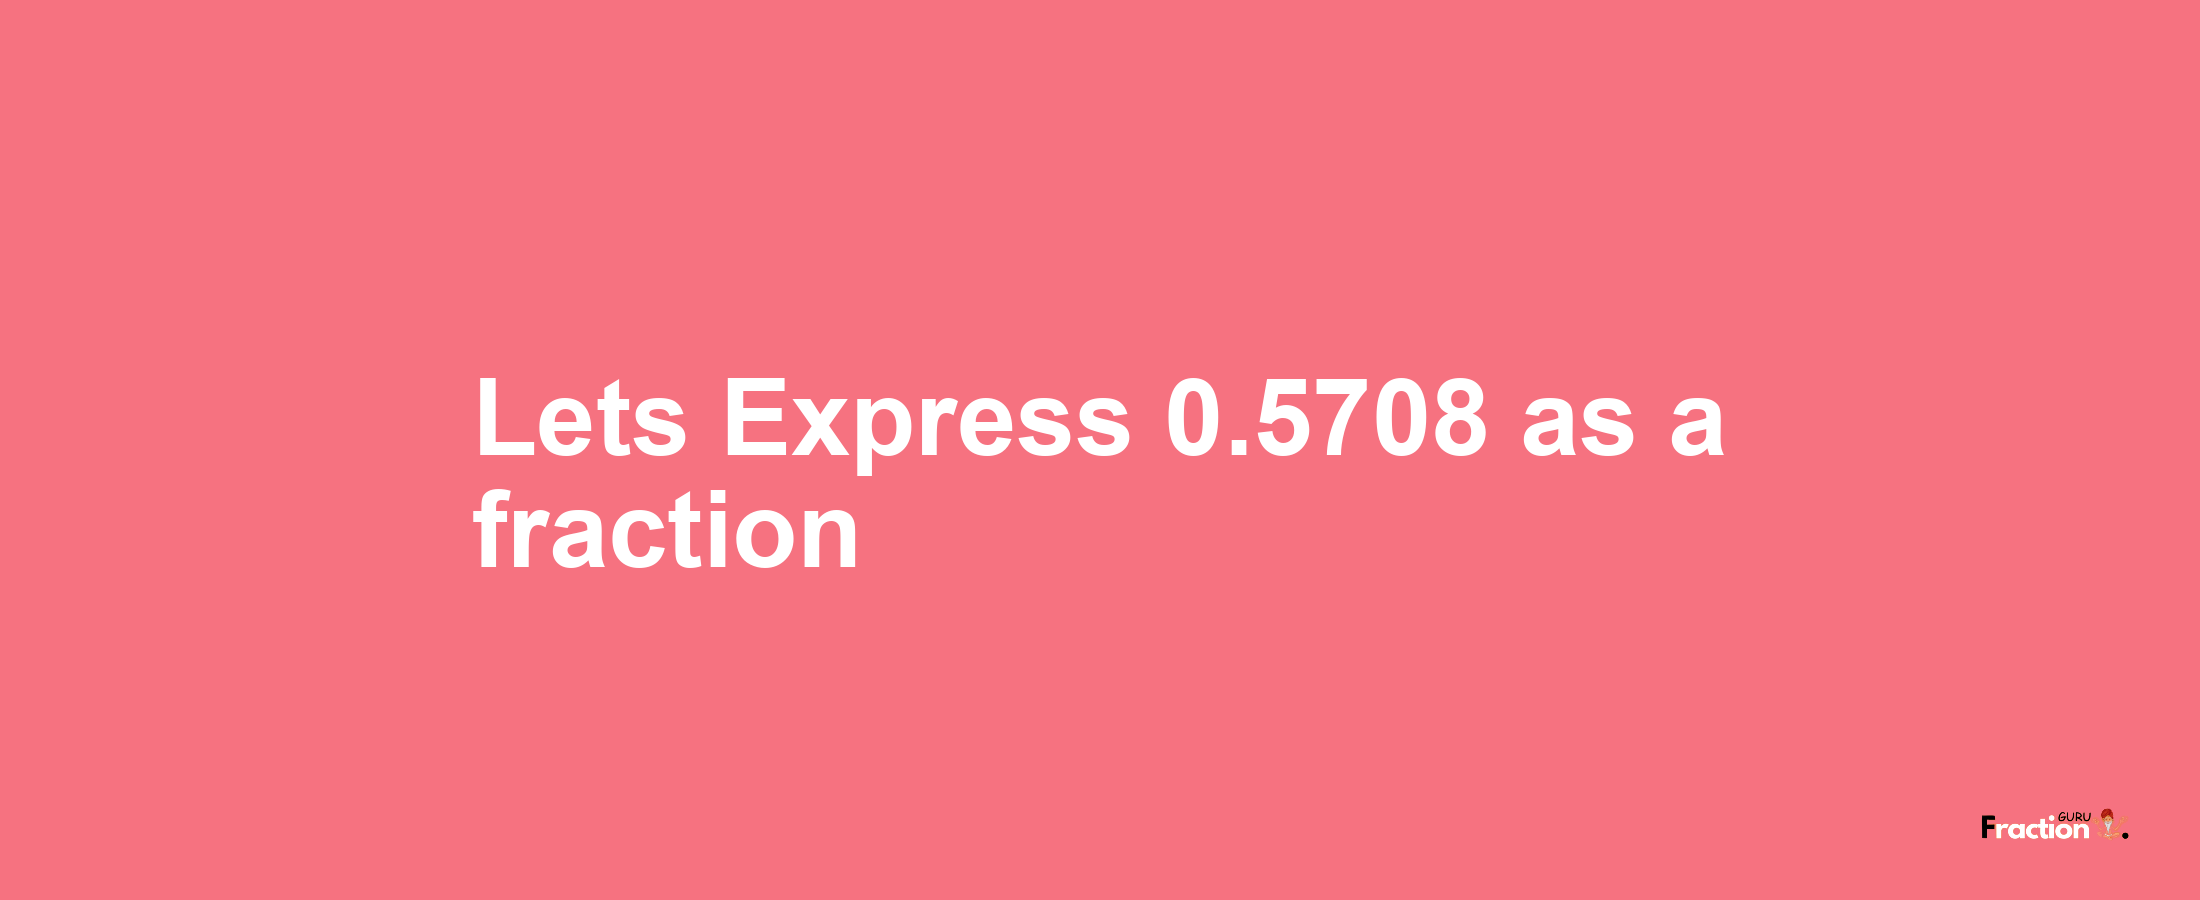 Lets Express 0.5708 as afraction